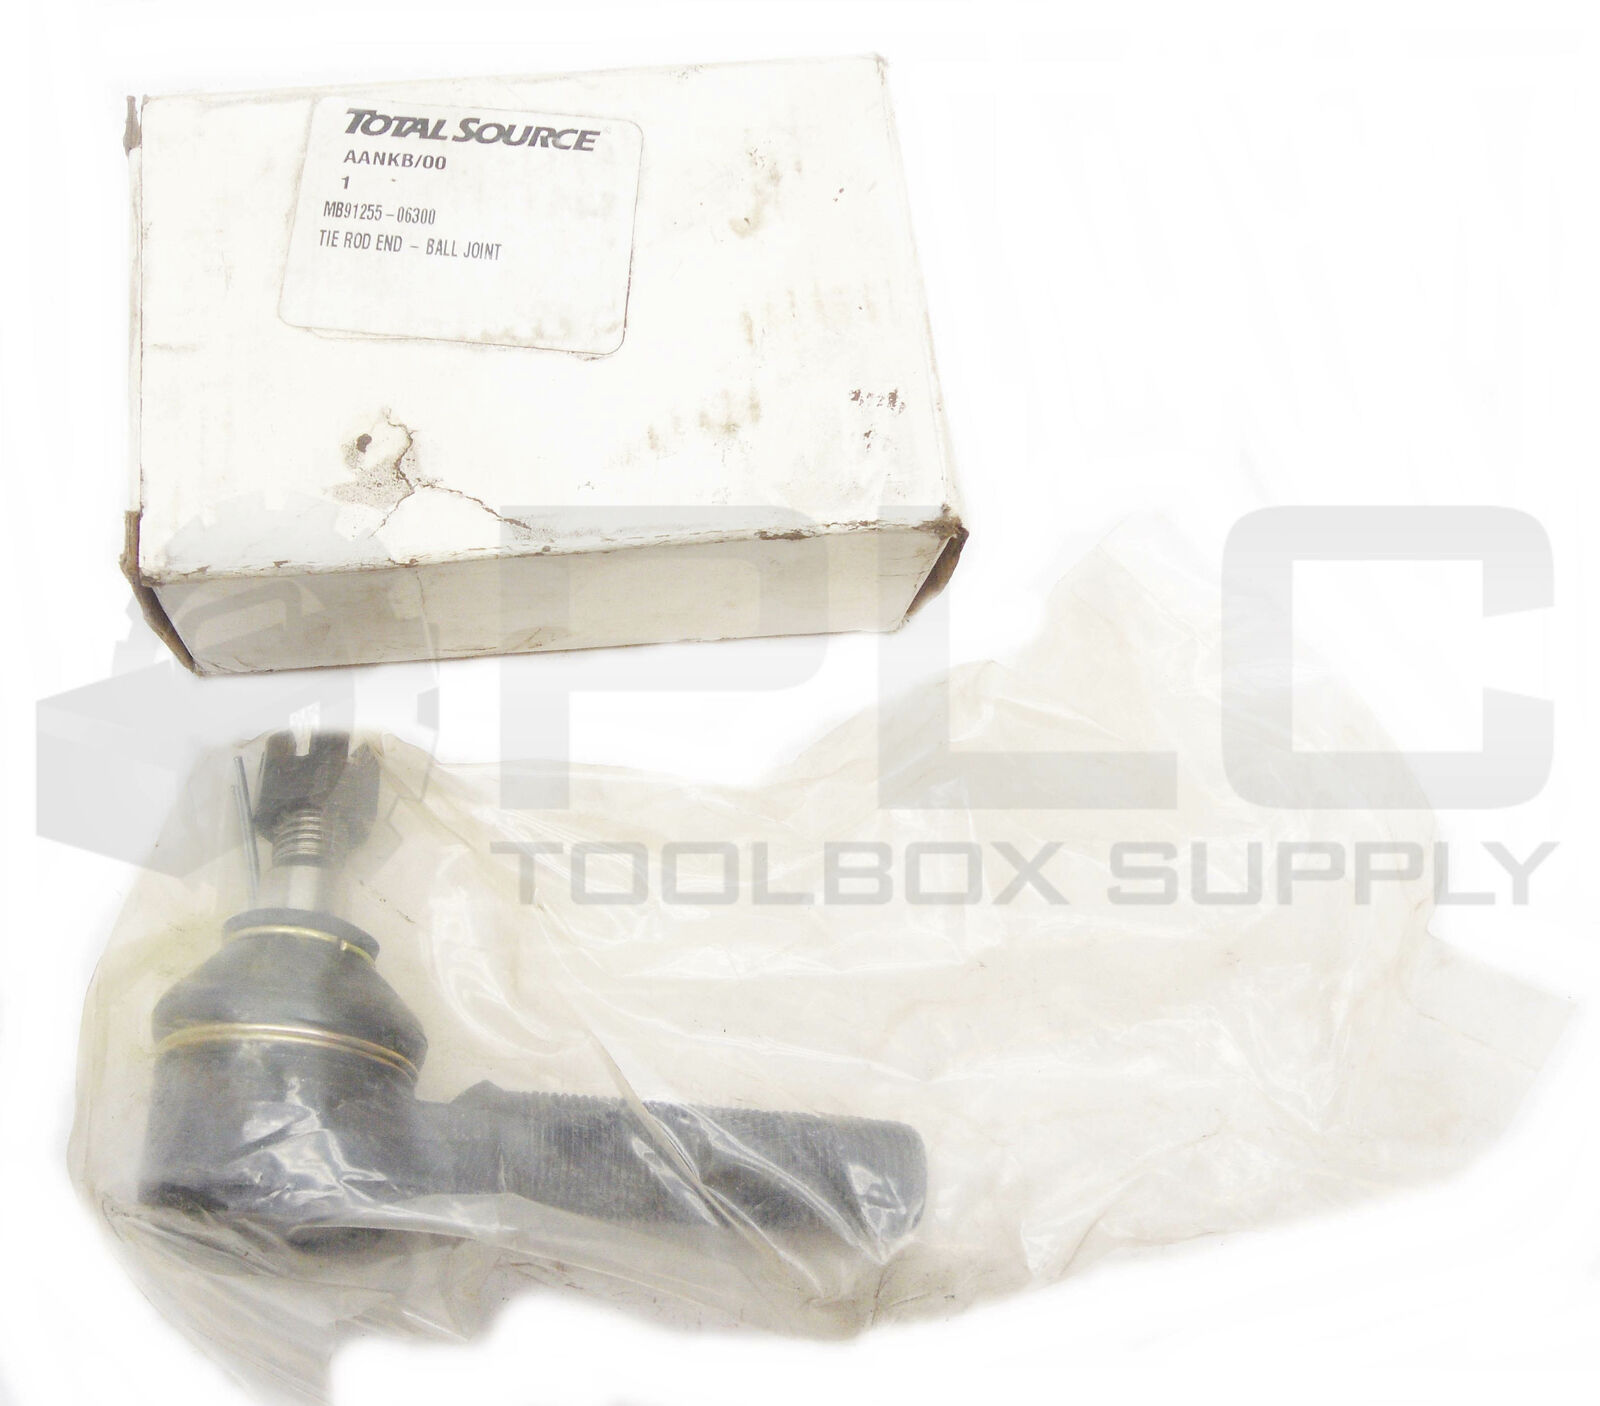 NEW TOTAL SOURCE MB91255-06300 TIE ROD END-BALL JOINT